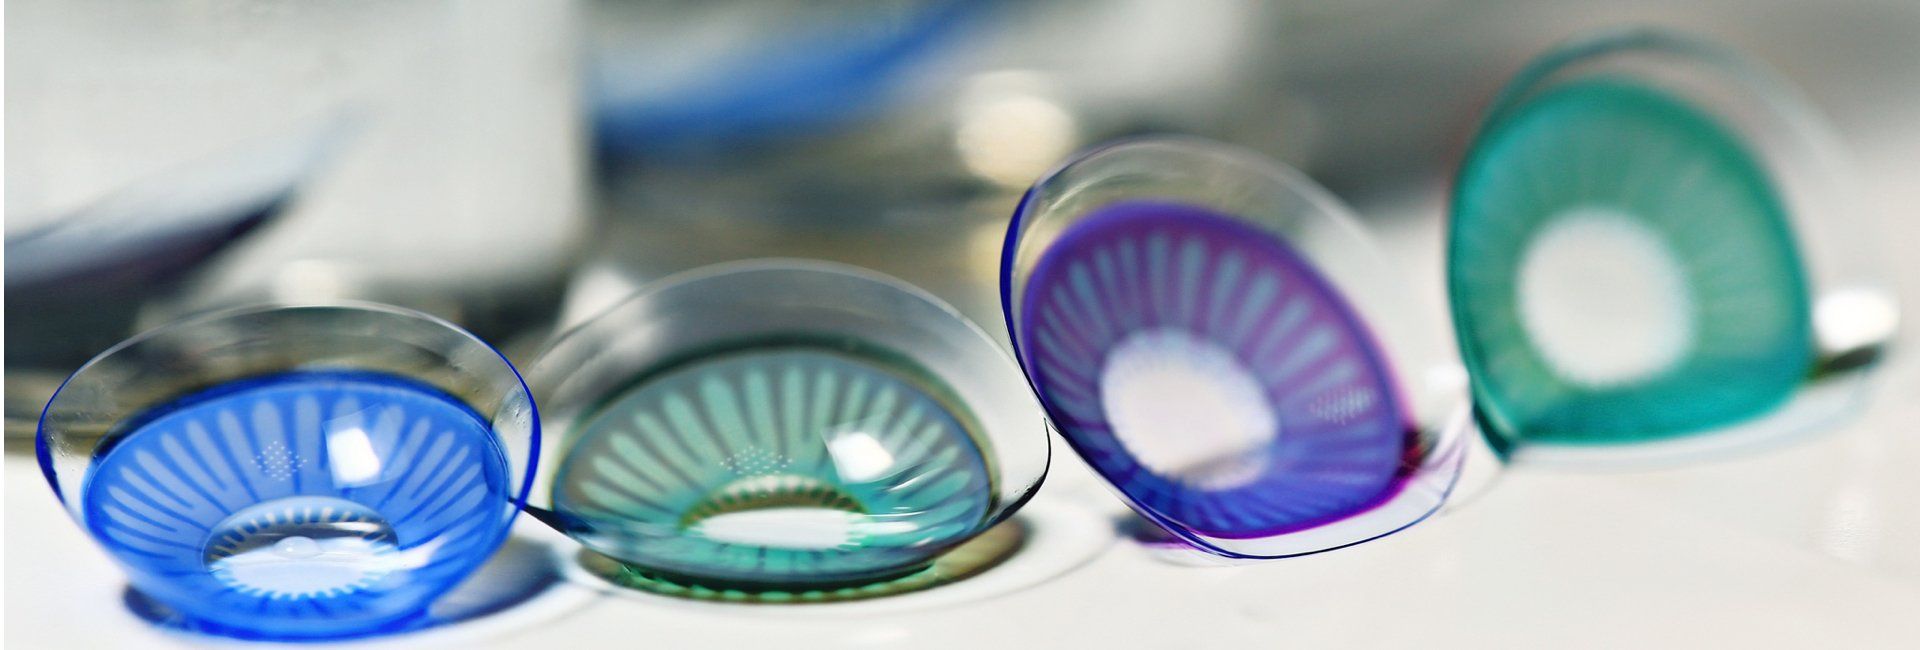 Blue, green and purple cosmetic contact lenses